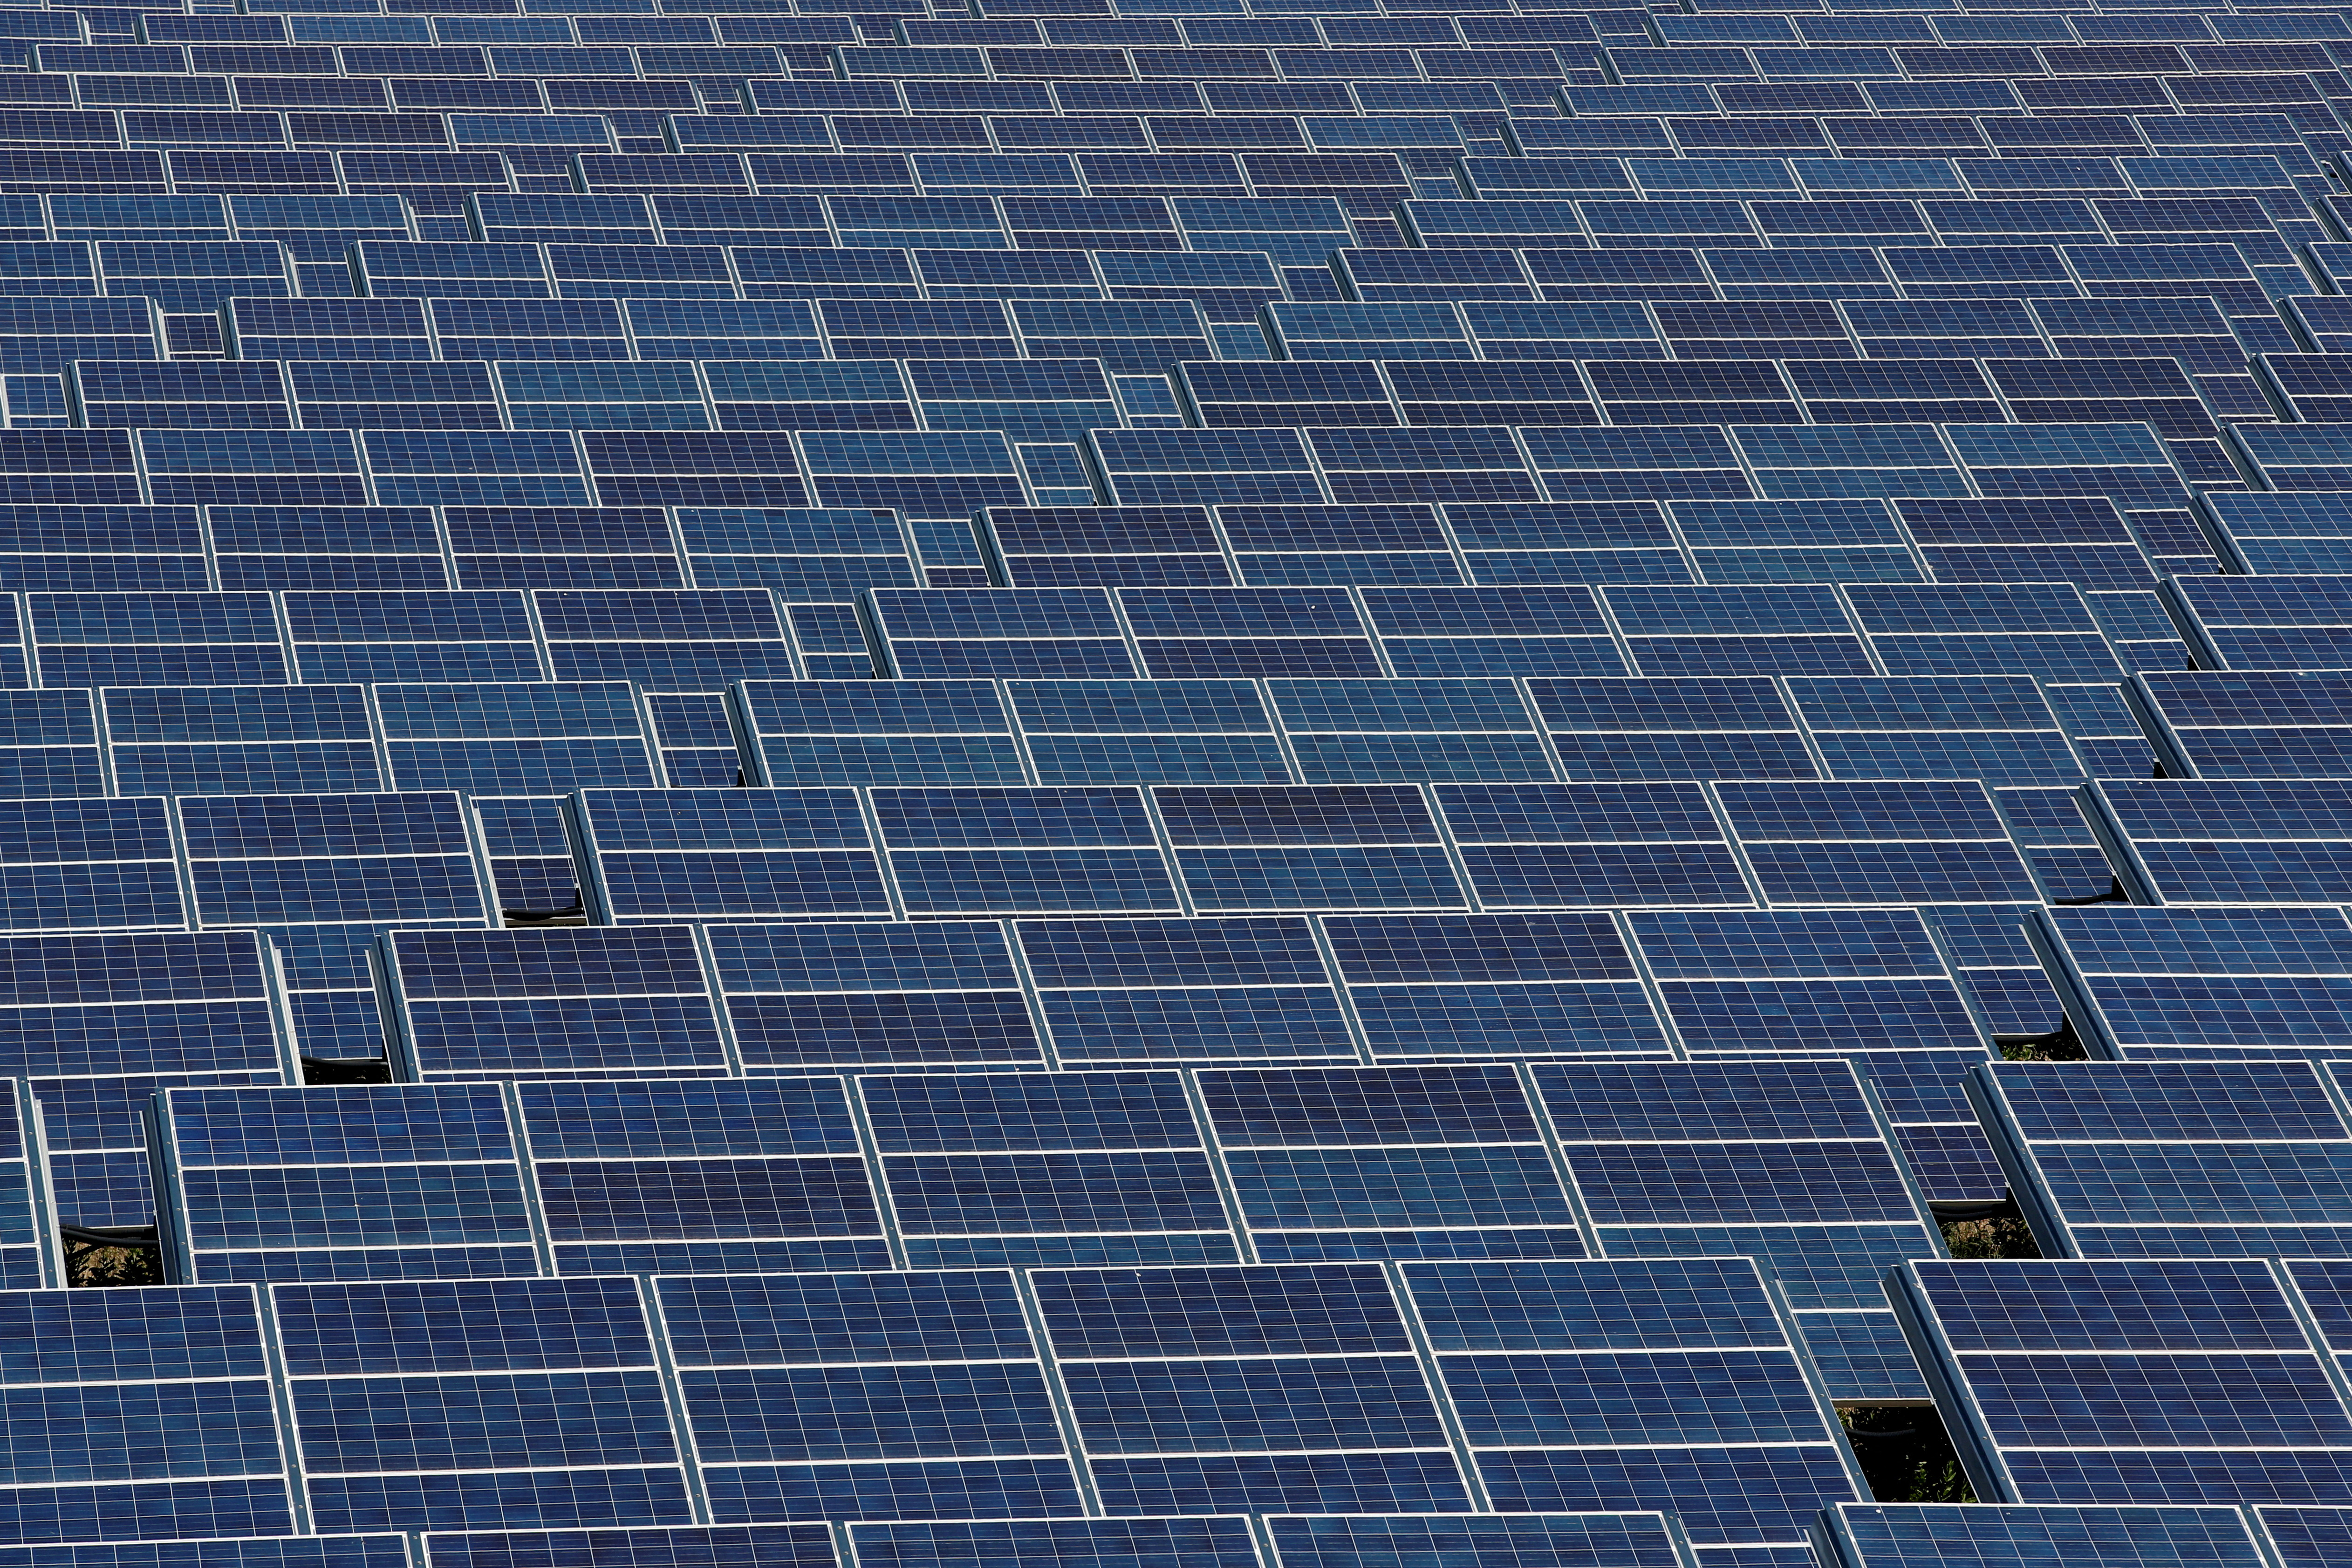 Solar panels to produce renewable energy are seen at the Urbasolar photovoltaic park in Gardanne